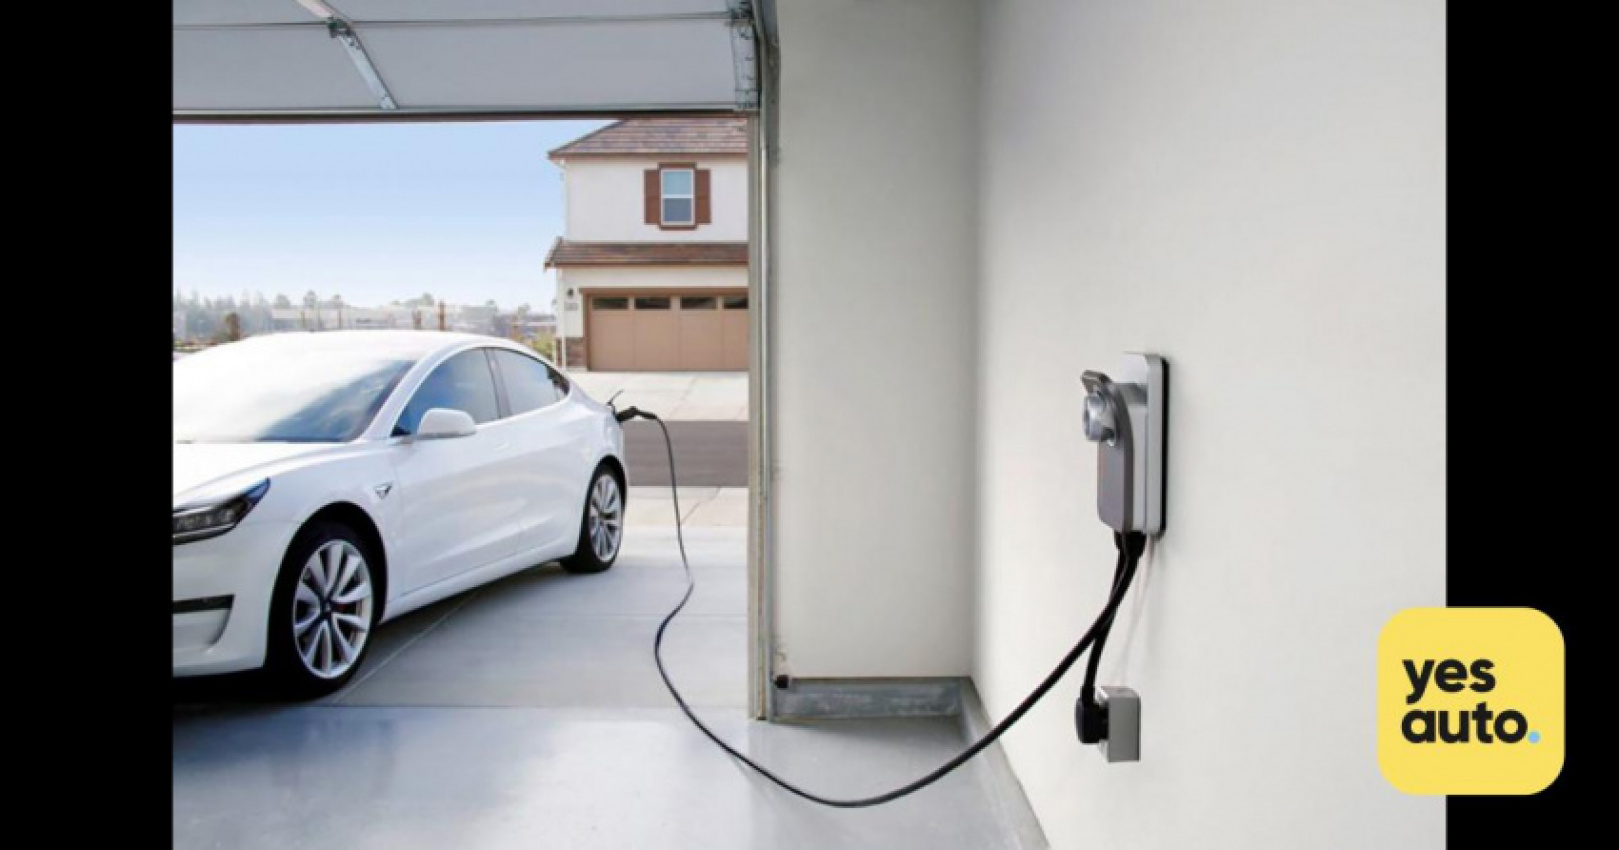 autos, cars, car news, eco-friendly, economical, electric vehicle, finance, hybrid cars, leasing, premium, review, nearly 80% of drivers think that purely electric cars are too expensive